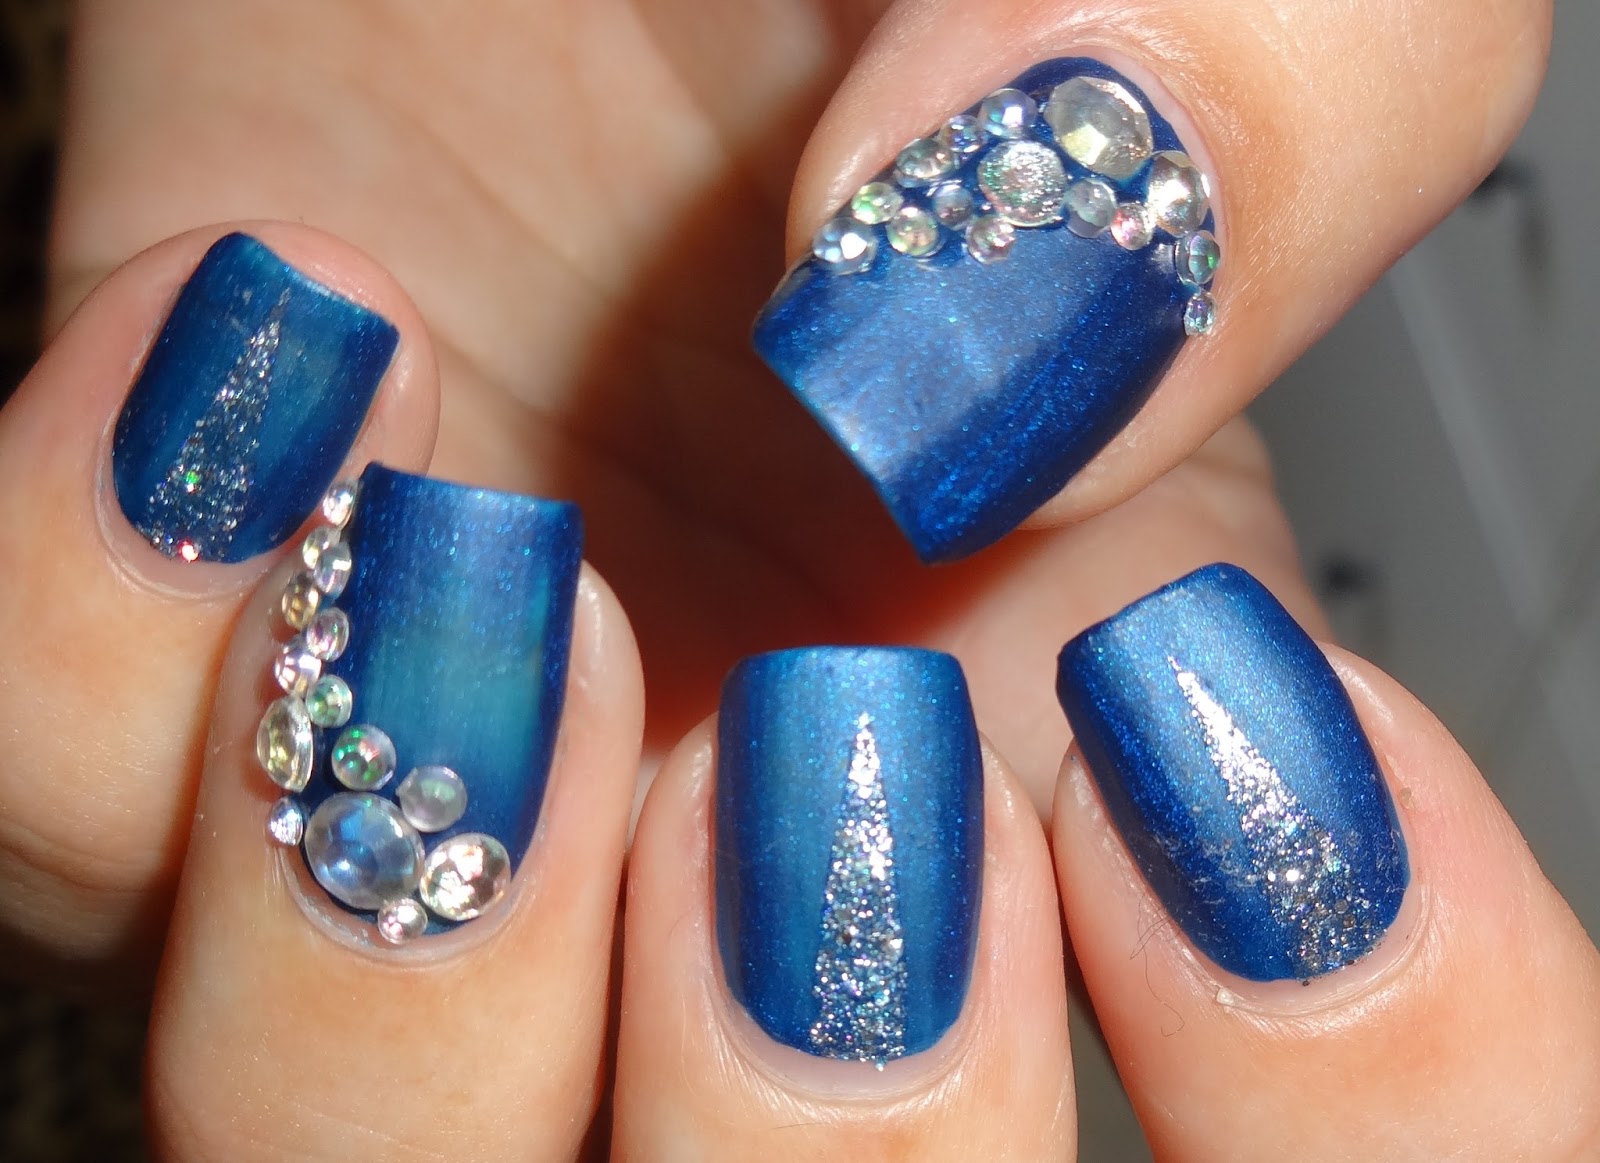 7. Nail designs with jewels and gems - wide 3